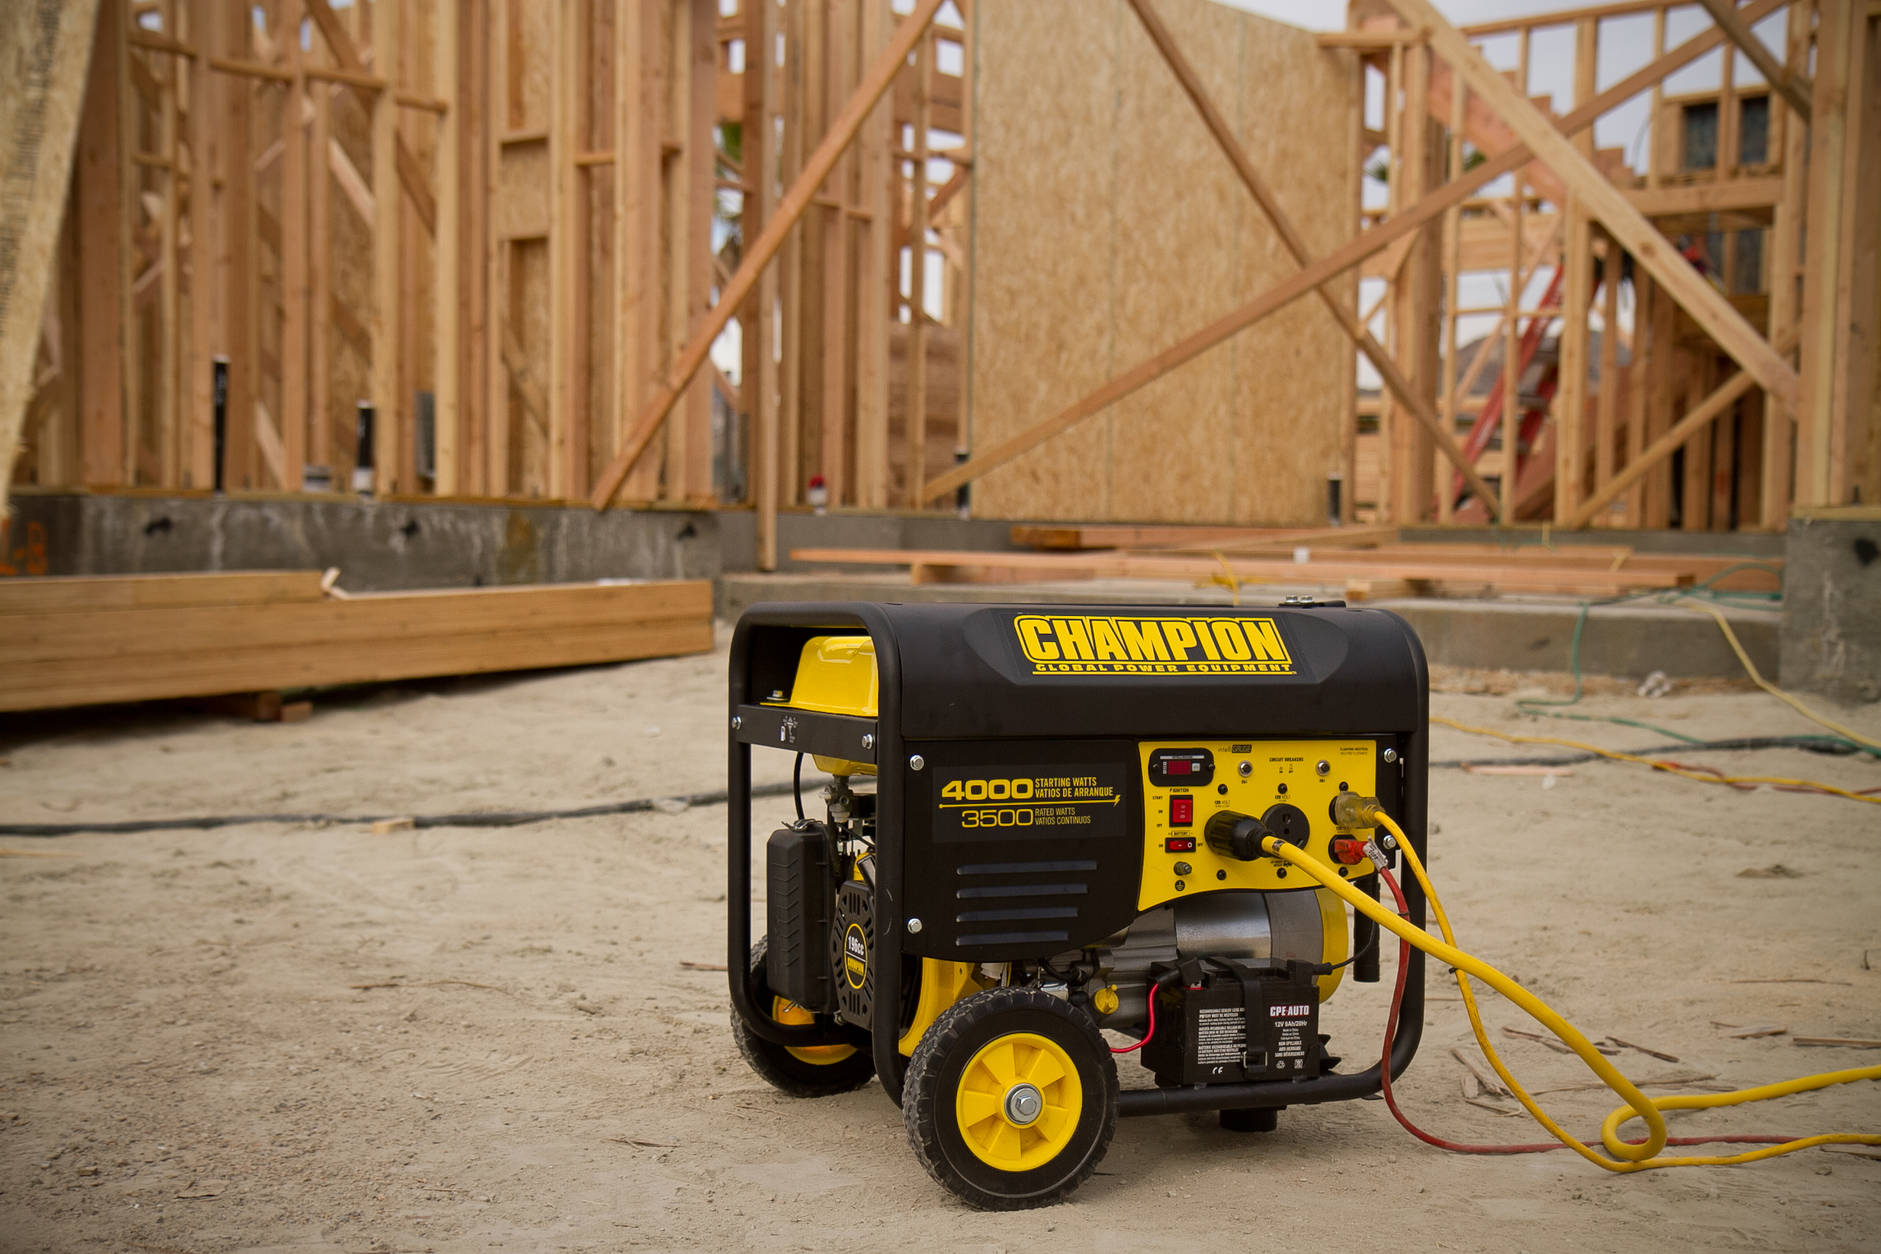 A Champion generator in a construction site.